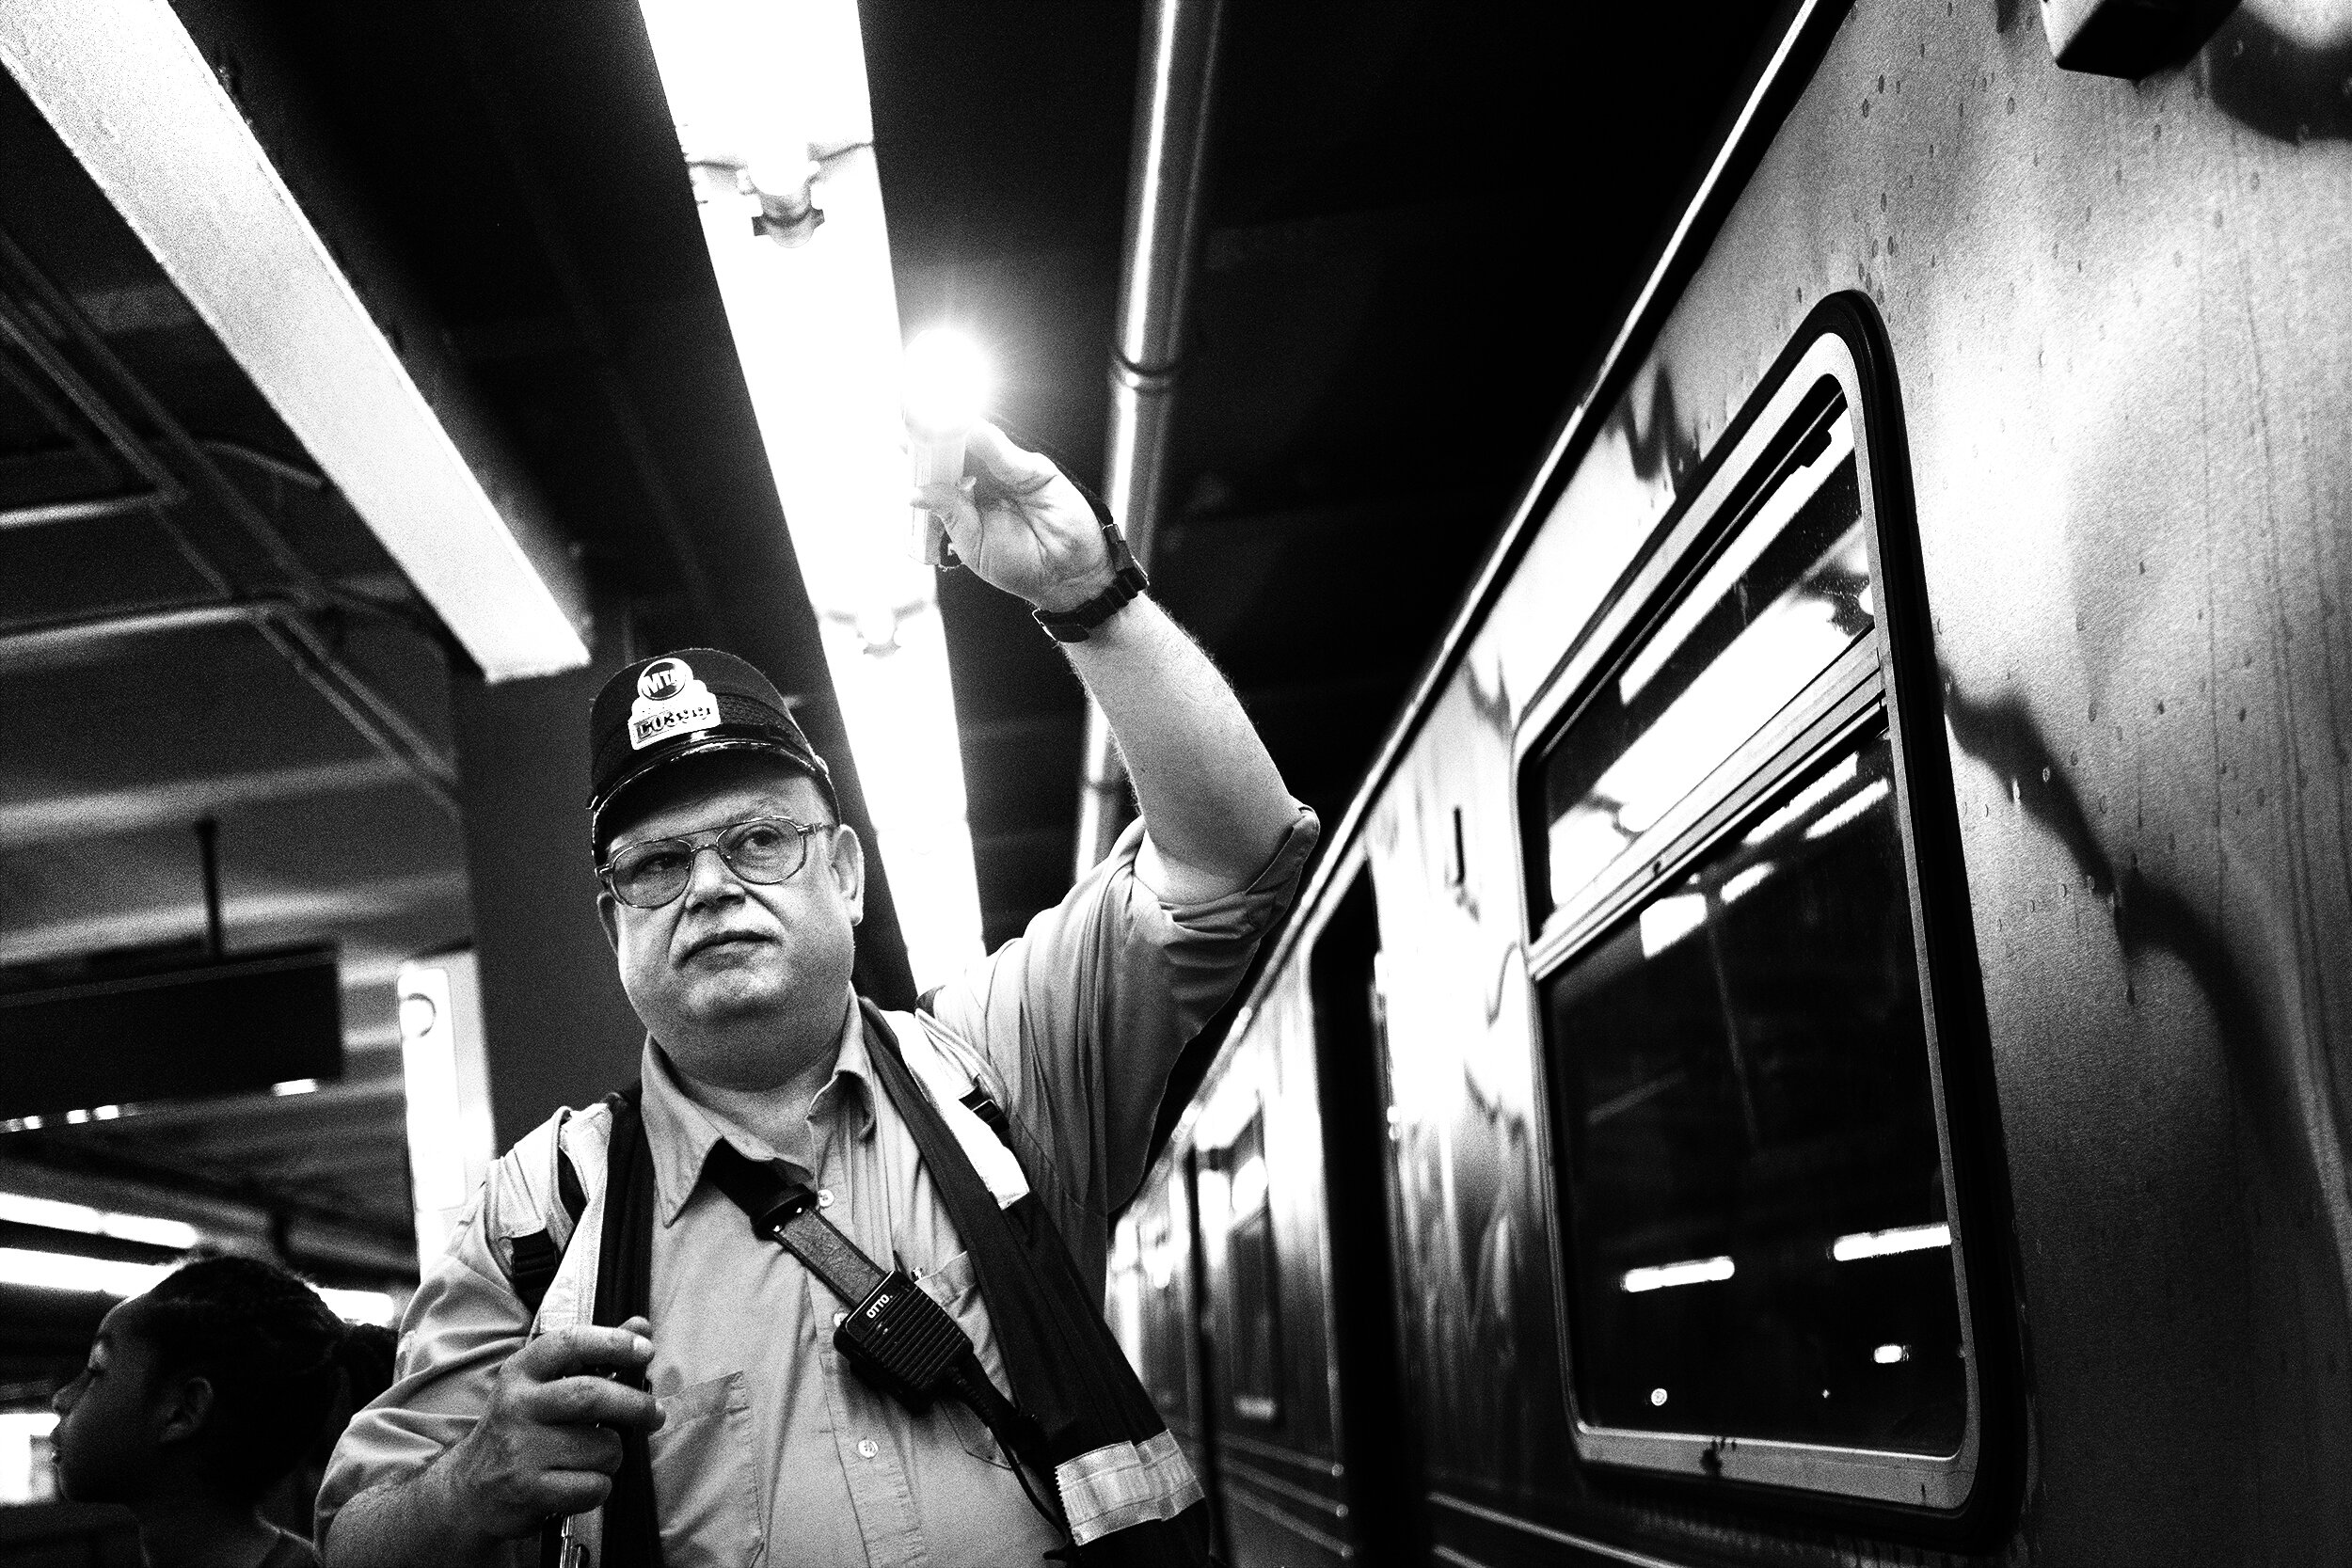 Brklyn_Subway_2018_Conductor_With_Flash_Light-009crp.jpg